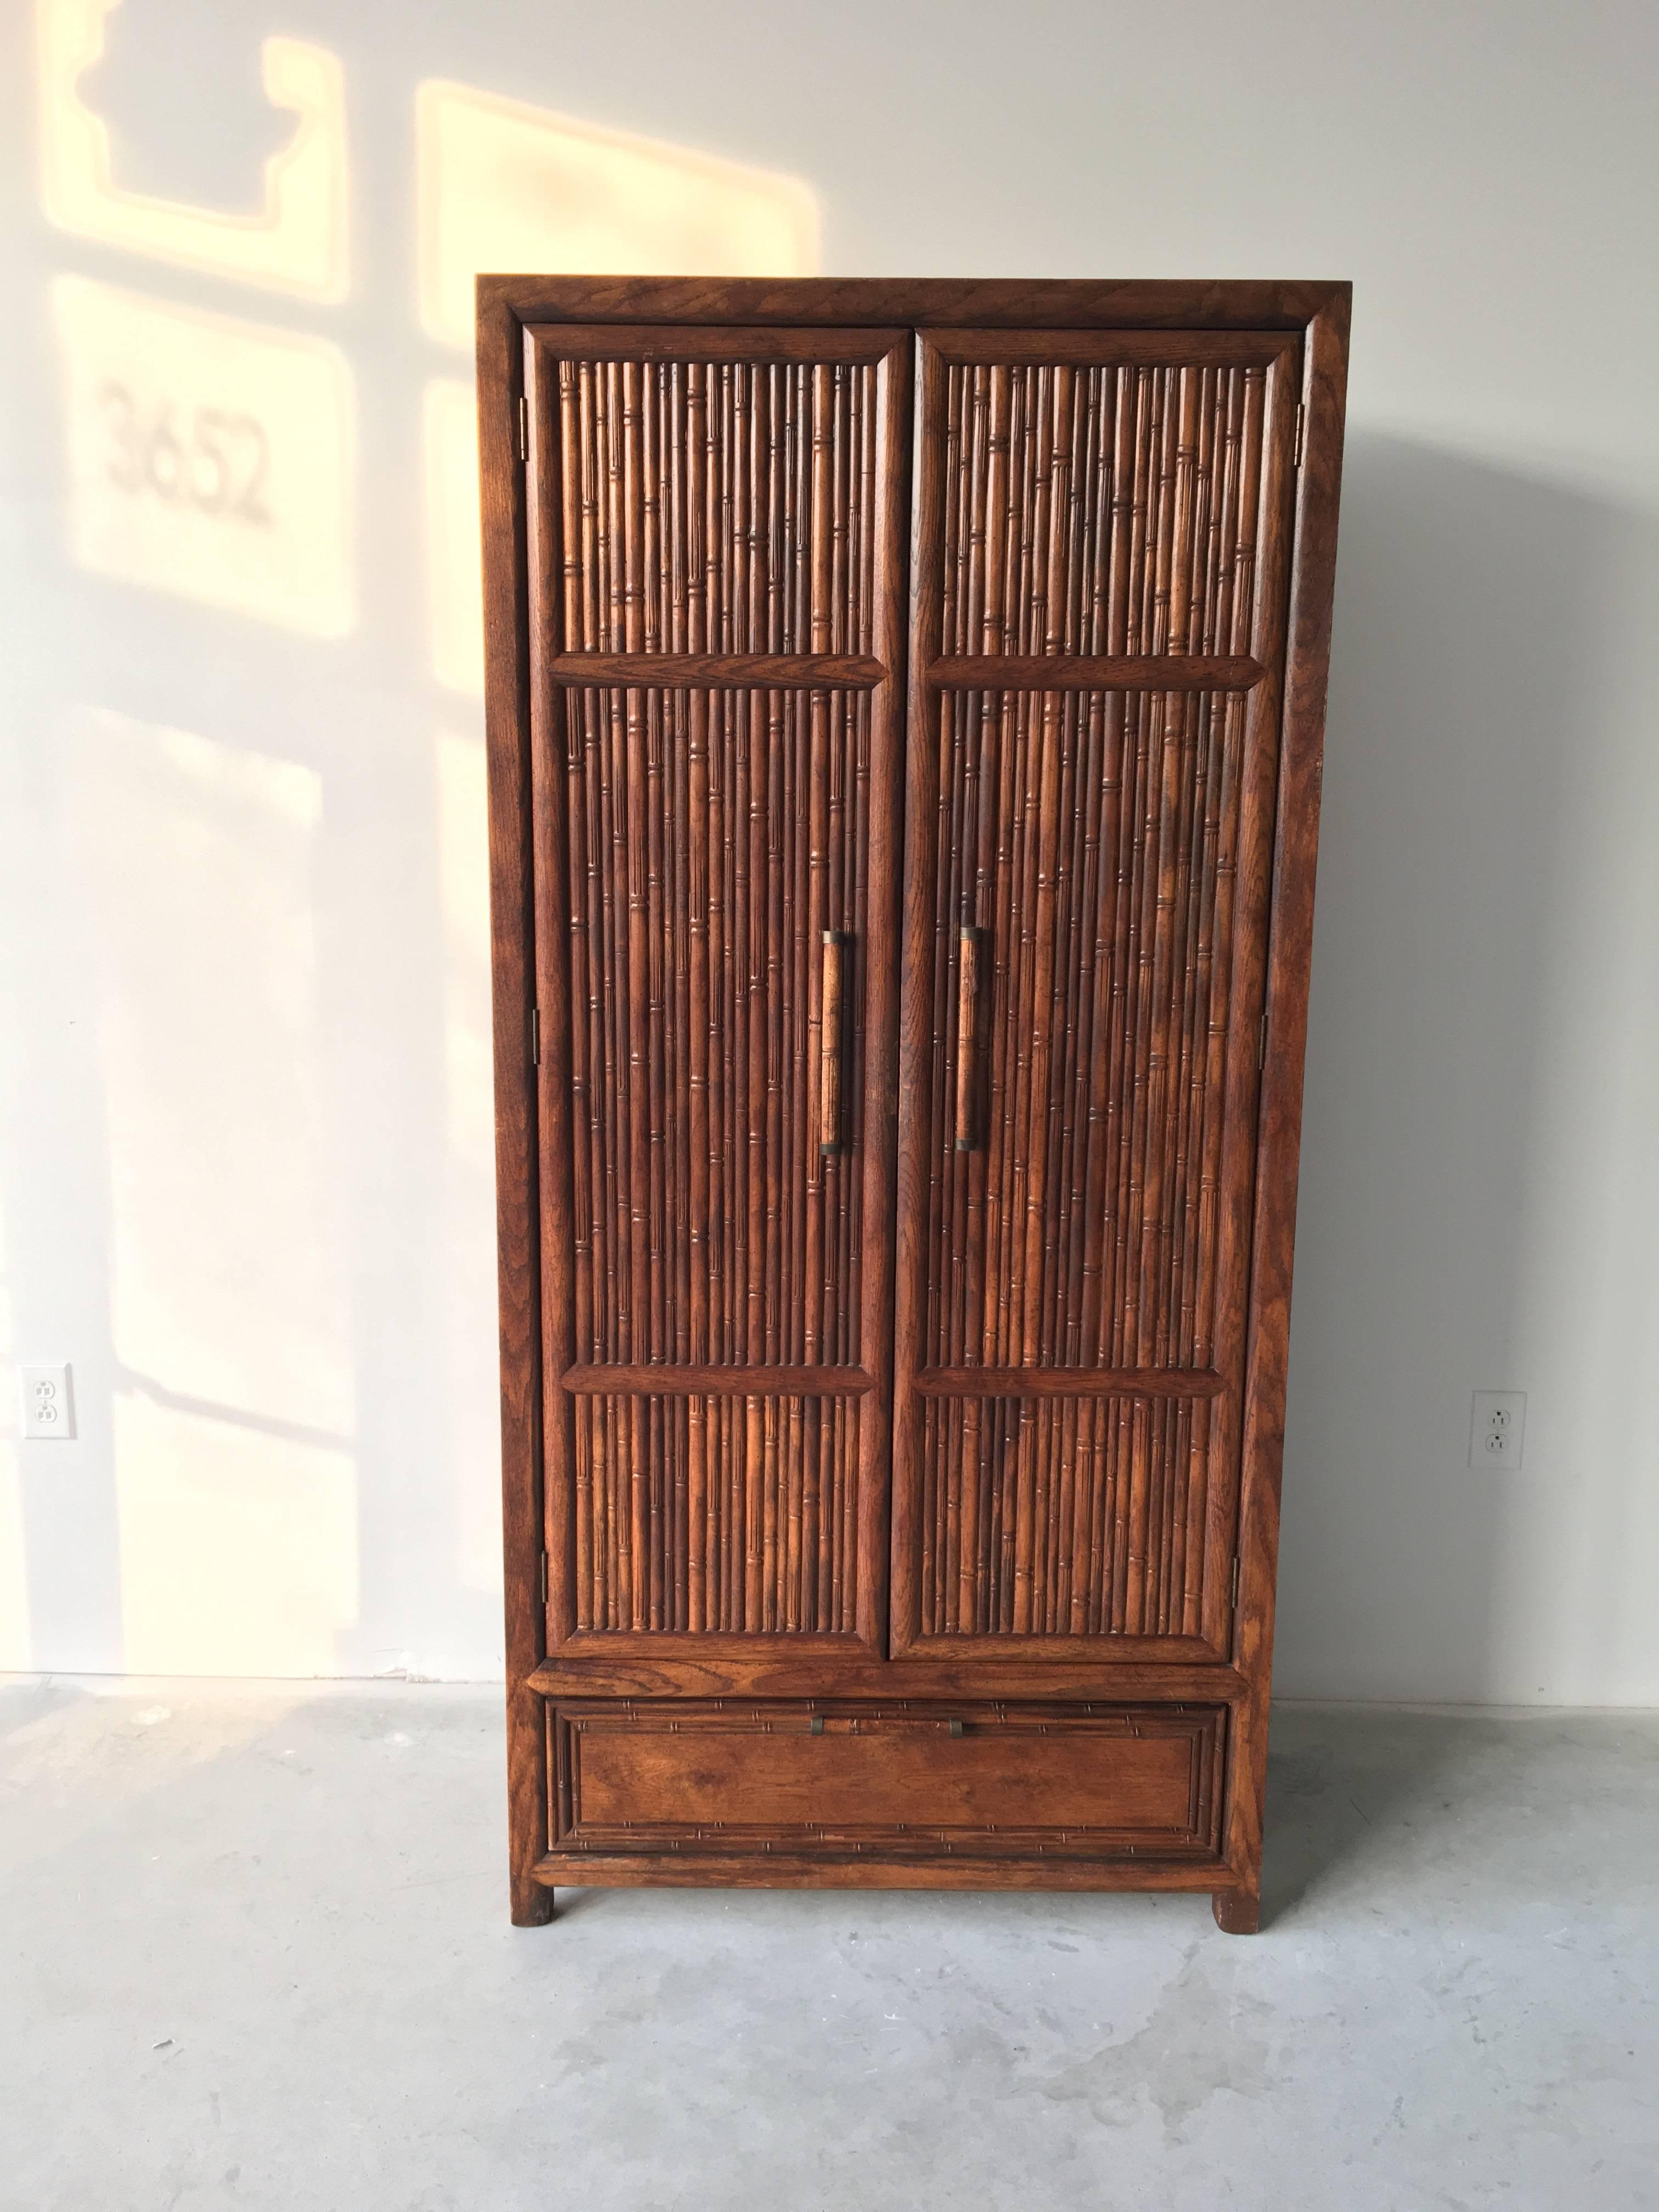 Offered is a rare and fabulous, Century Furniture faux-bamboo armoire. This piece is from their commemorative, bicentennial Candia Collection line, 1975-1976. It's a substantial piece, made of solid oak. The interior has a six cube shelving unit,